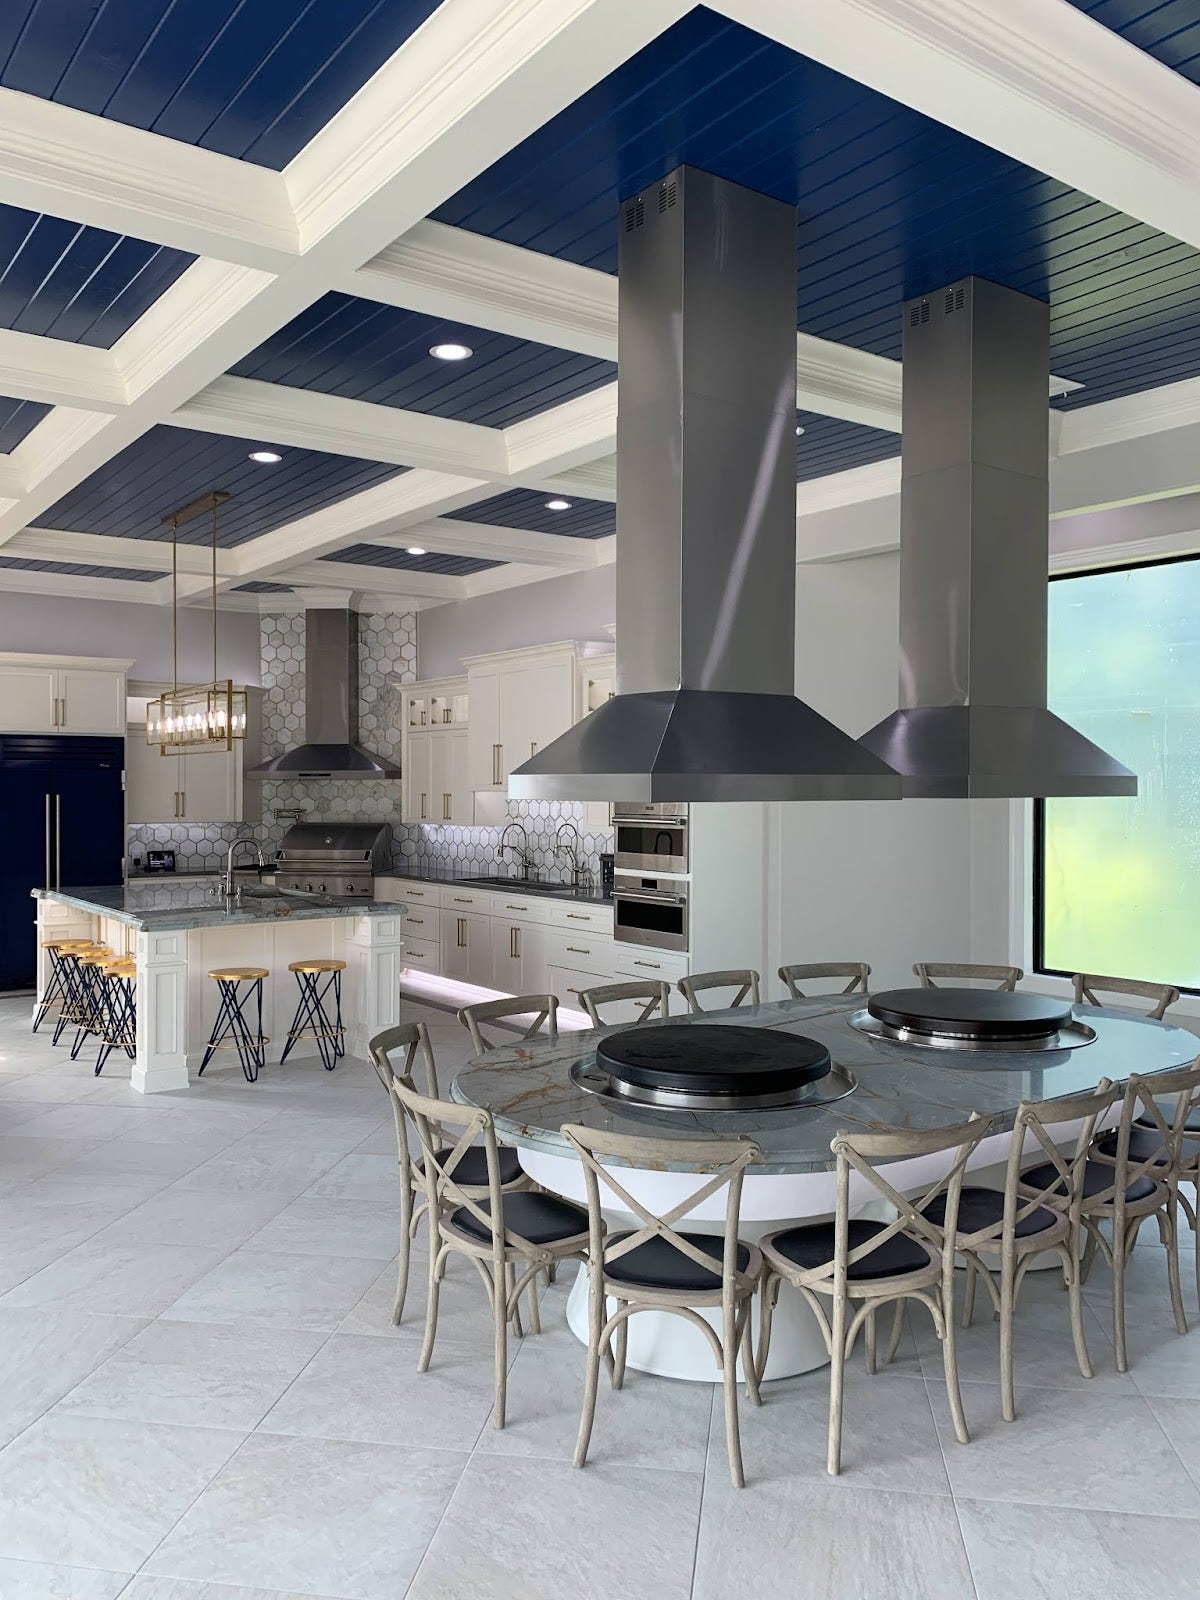 Bright and airy kitchen design with vaulted ceilings, sophisticated stainless steel vents, and an elegant round cooking table surrounded by stylish chairs. - Proline Range Hoods - prolinerangehoods.com 